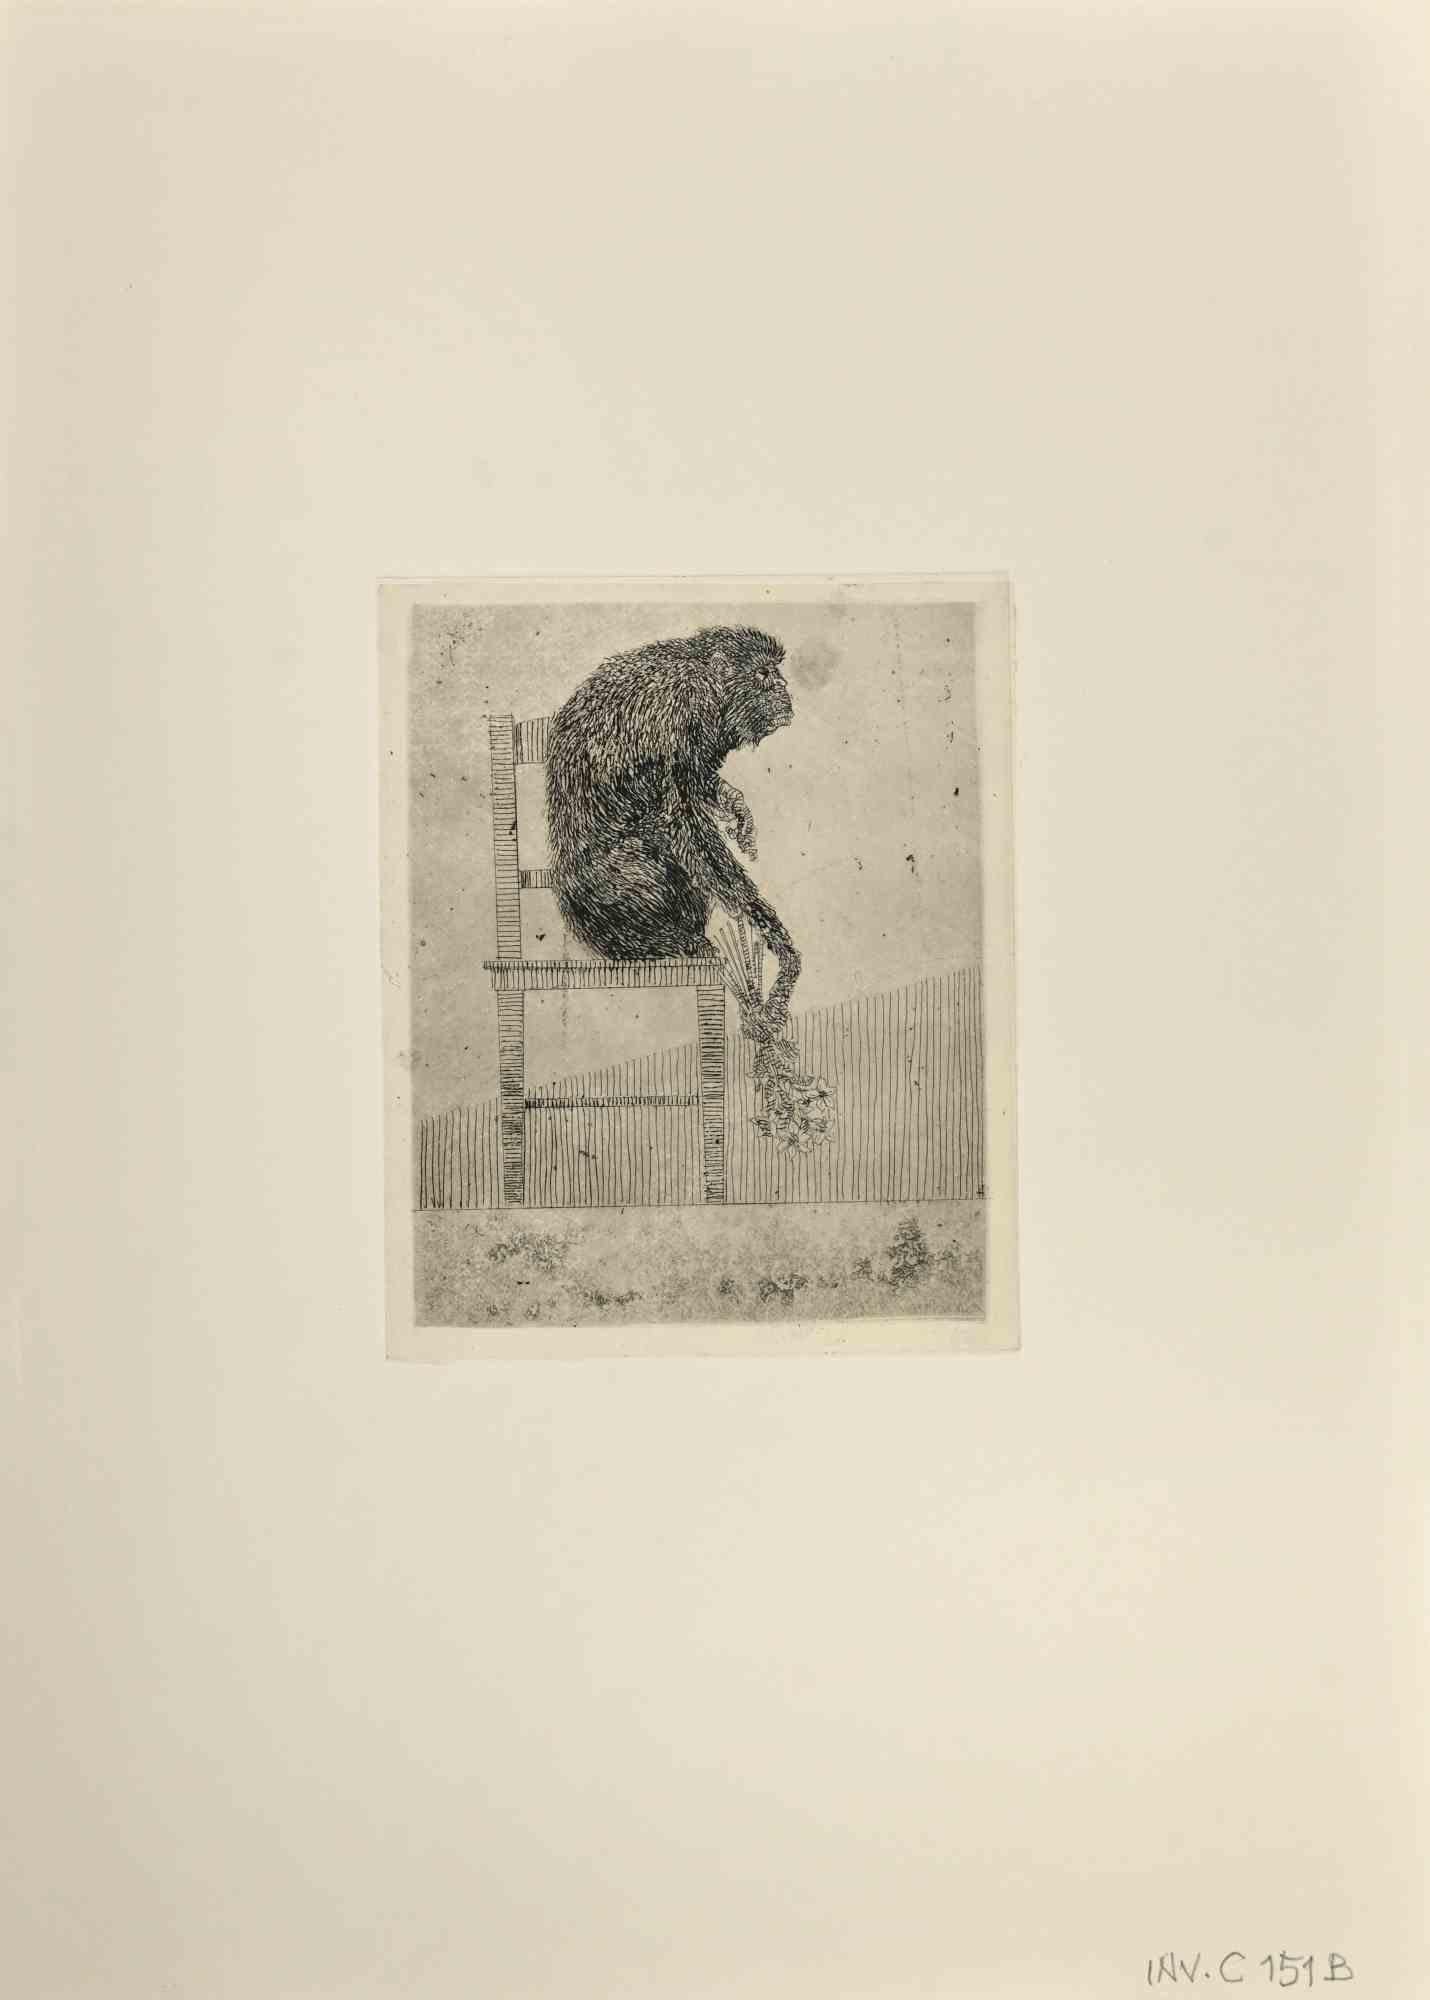 Monkey is an artwork realized by the Contemporary Italian artist  Leo Guida (1992 - 2017) in the 1970s.

Original black and white etching on paper.

Good conditions.

Leo Guida  (1992 - 2017). Sensitive to current issues, artistic movements and